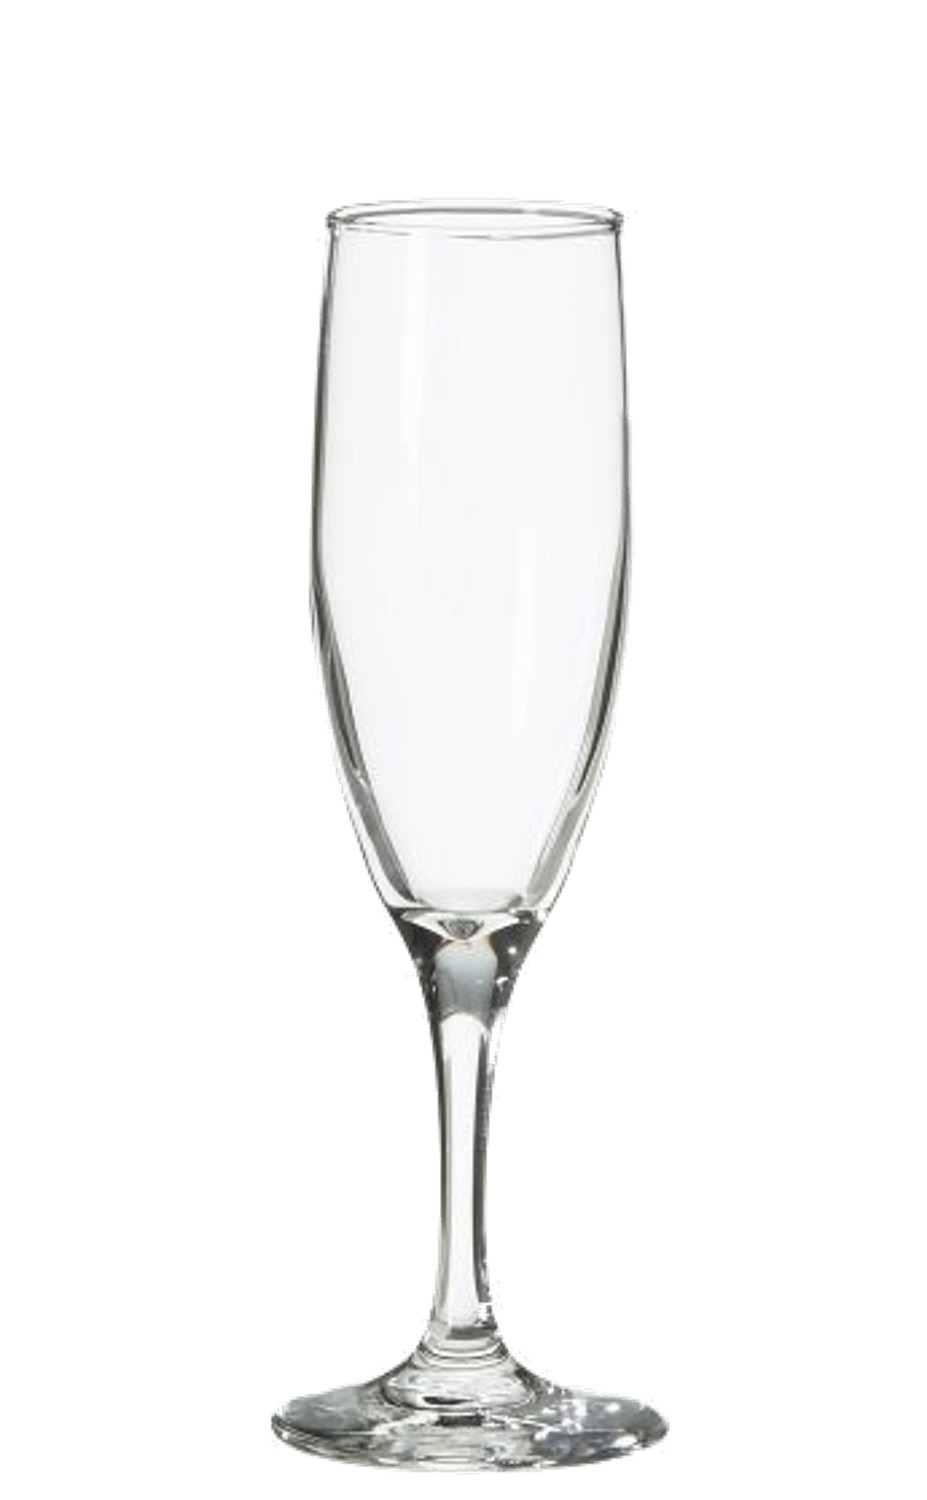 http://www.the-gift-of-wine.com/Images/ChampagneFlute.jpg